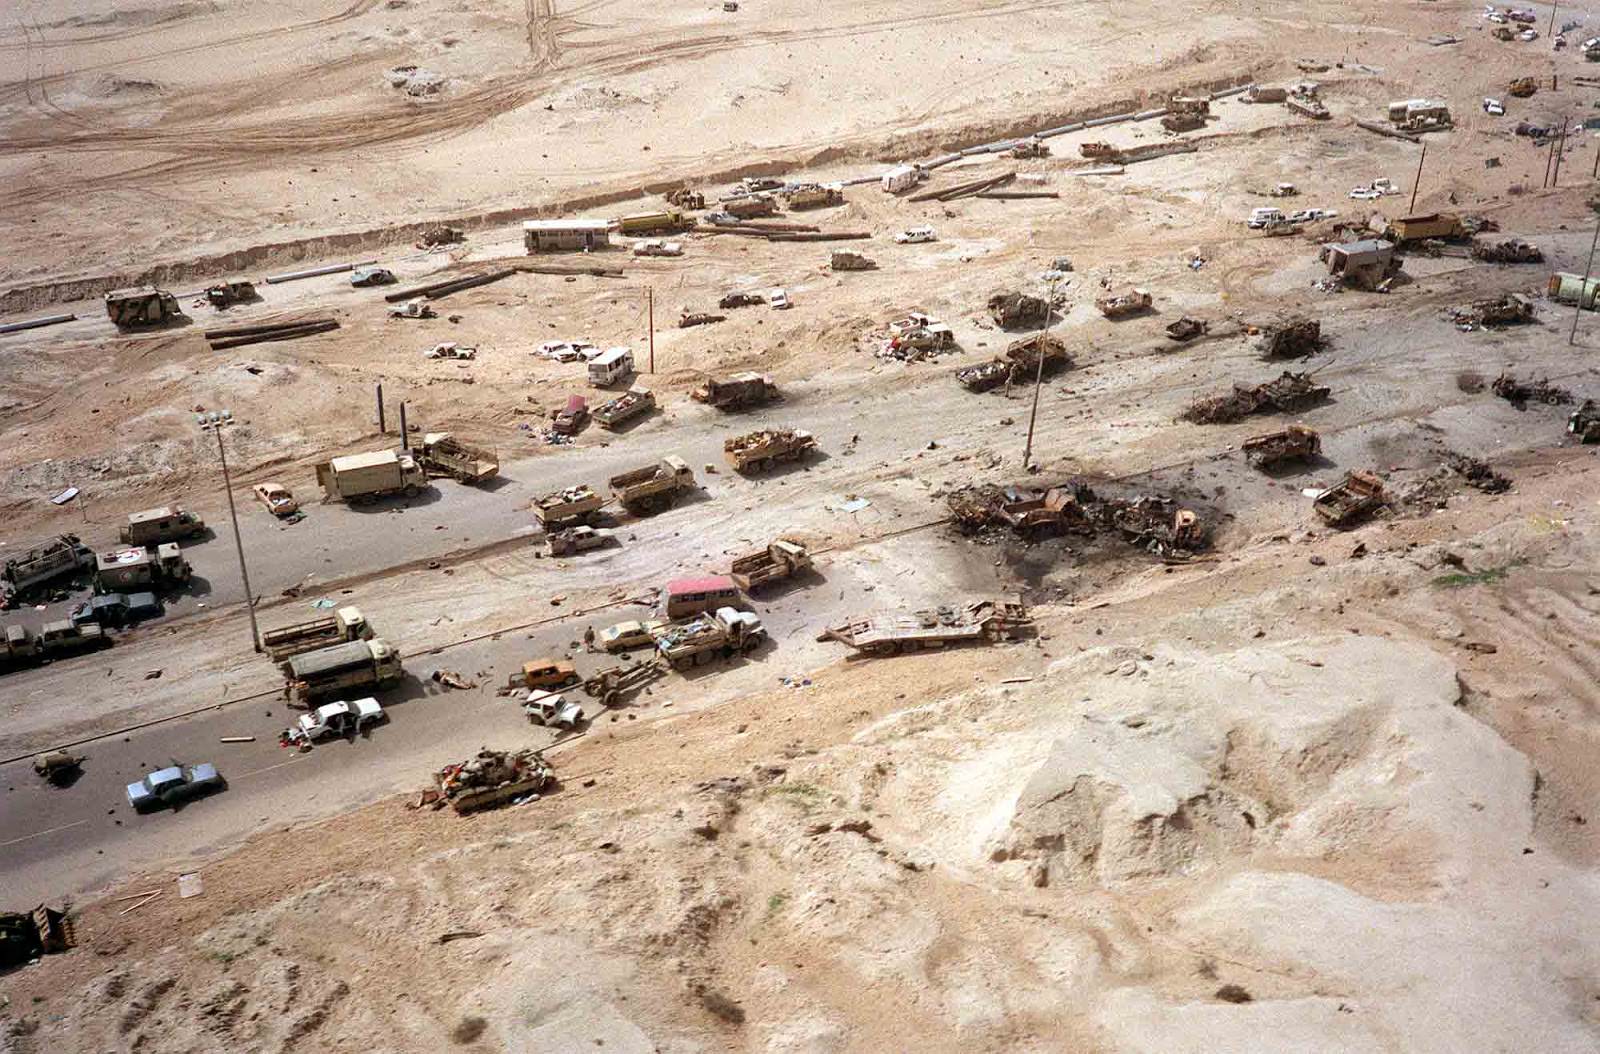 An aerial view of The Highway of Death in Iraq in 1991. The highway was 6 lanes and used by the Iraqi Army to invade Kuwait. It was also being used during their retreat. While retreating, coalition forces, and mainly US planes, attacked the column destroying more than 2000 vehicles and killing up to 600 people. An unknown number of civilians either as hostages or part of the column were also killed. It became controversial when the images of the charred bodies appeared to the public. Hundreds of people burned alive screaming in an unimaginable horror. Survivors tell the story as if it is straight out of a terror film. Many of those pictures can be seen online, but they are truly gruesome. Most Iraqi forces still escaped, and the objective of the bombings wasn't even achieved. Almost immediately following the bombing and possibly because of it, the US ceased operations against Iraq. This decision would keep Saddam Hussein in power for another 12 years.